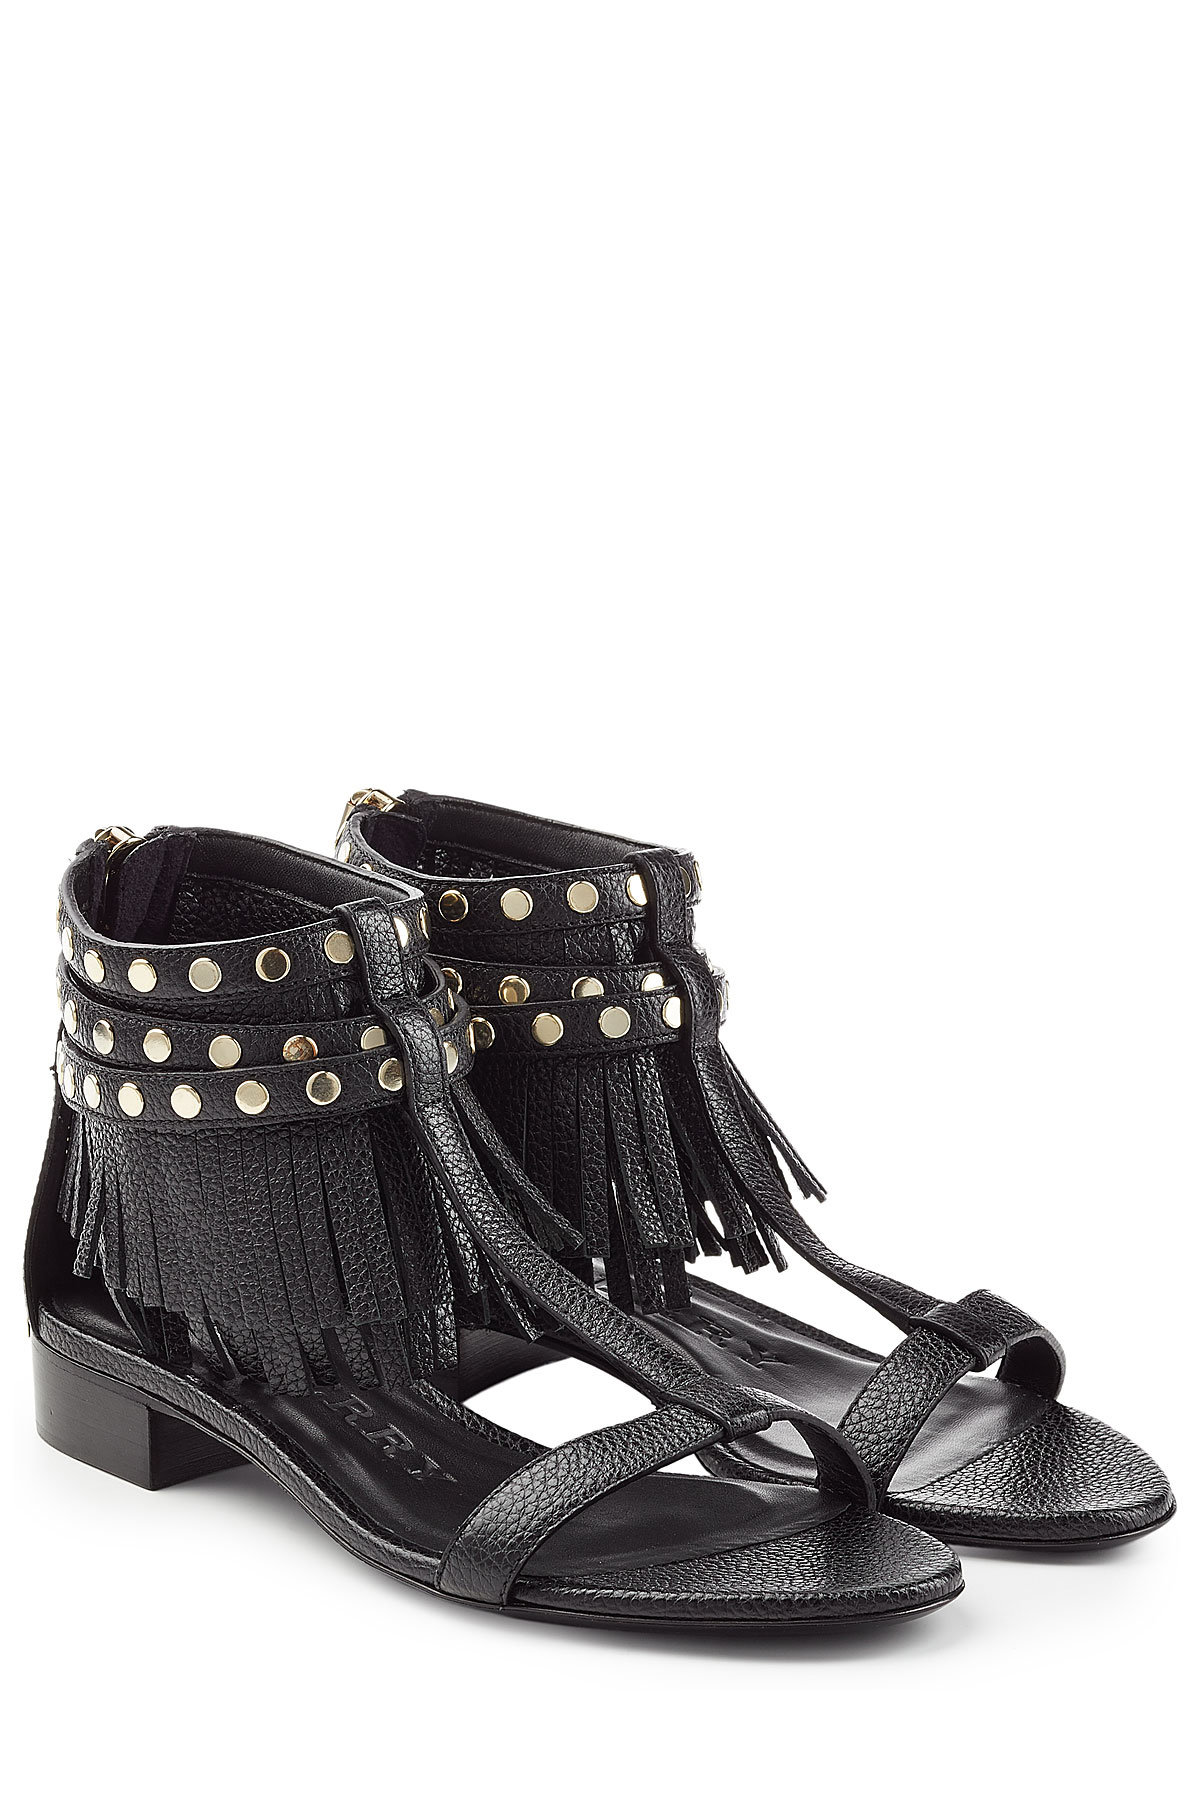 Burberry - Abercorn Leather Sandals with Fringe